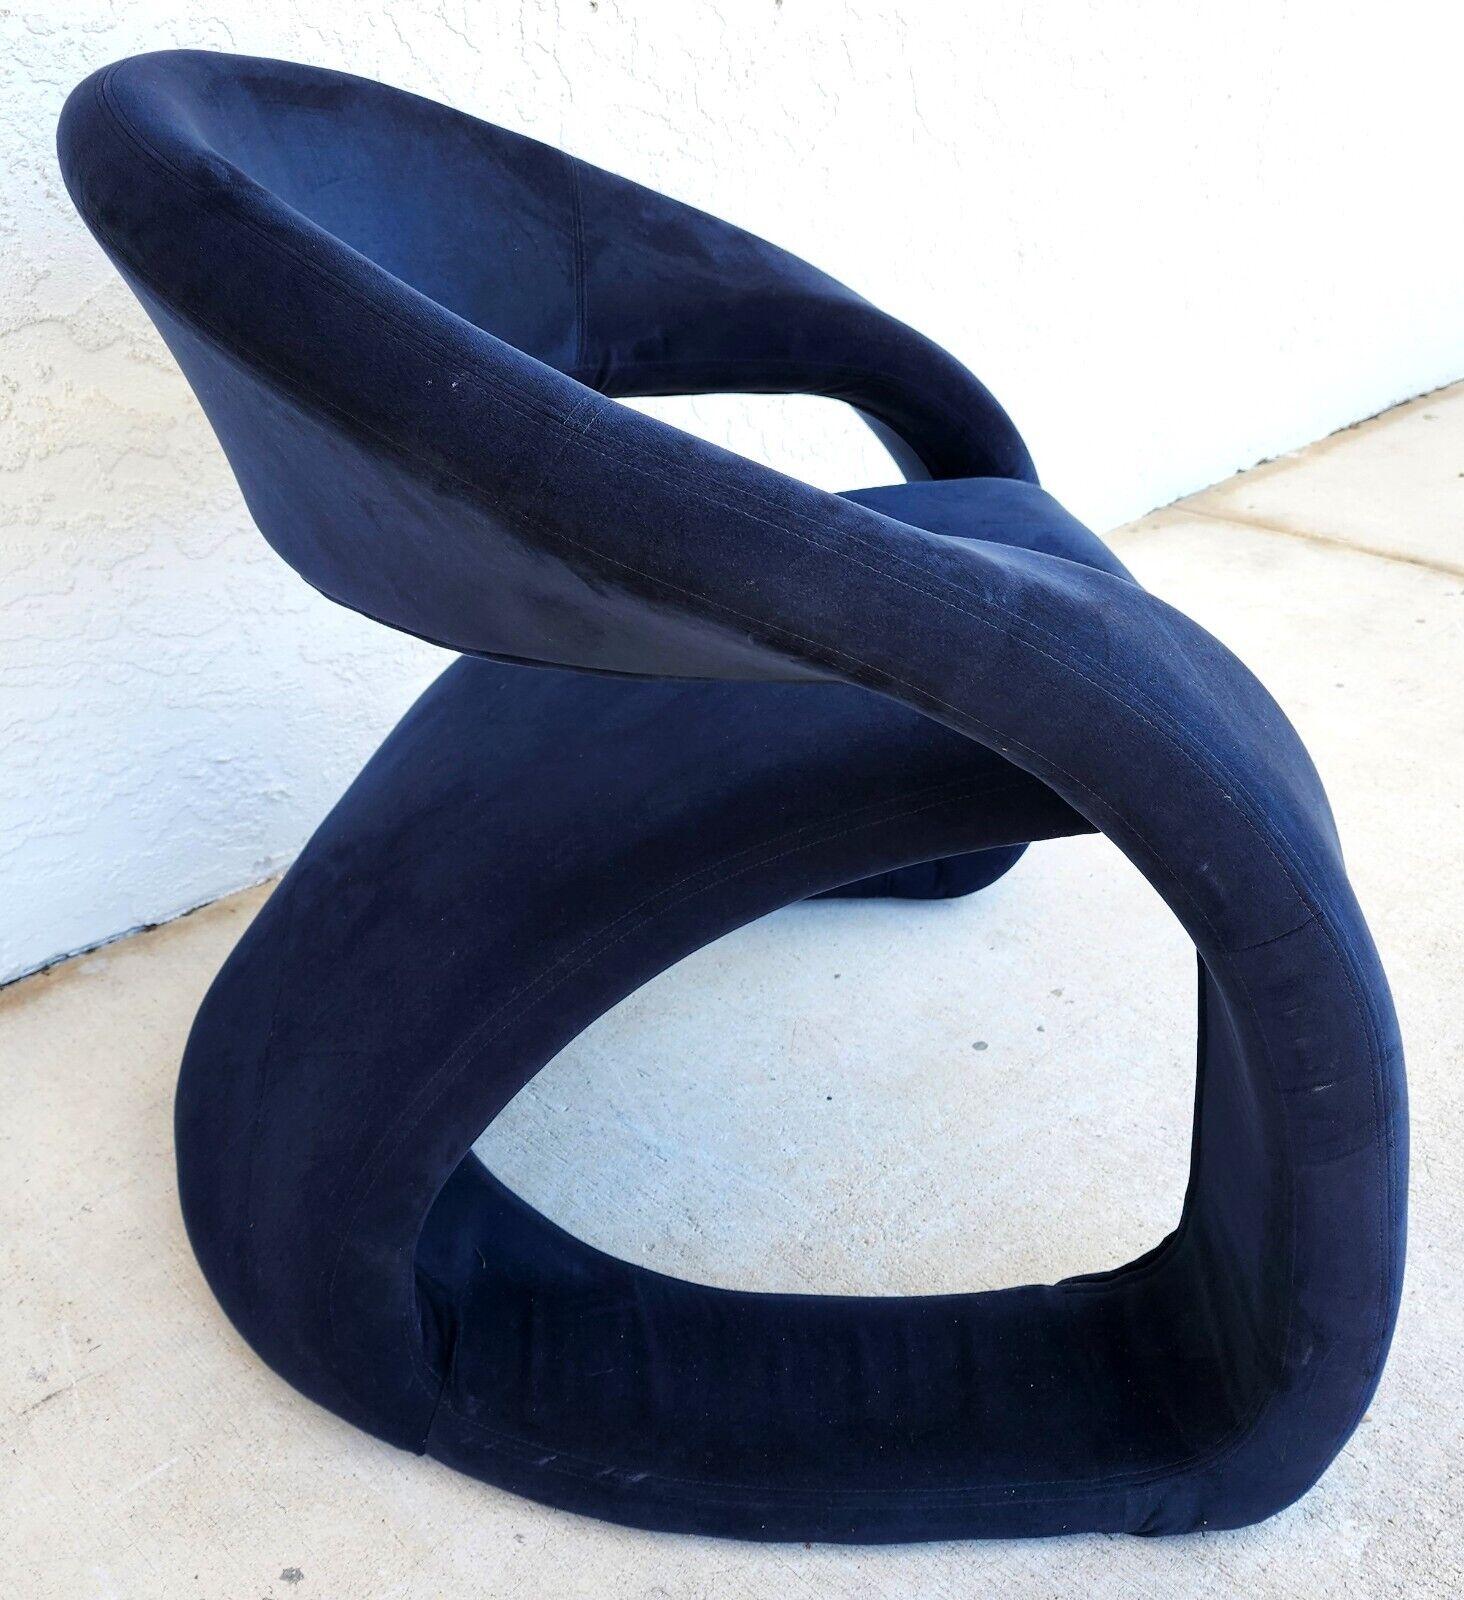 For FULL item description click on CONTINUE READING at the bottom of this page.

Offering One Of Our Recent Palm Beach Estate Fine Furniture Acquisitions Of An 
Original Postmodern Tongue Lounge Chair in Blue by JAYMAR

Approximate Measurements